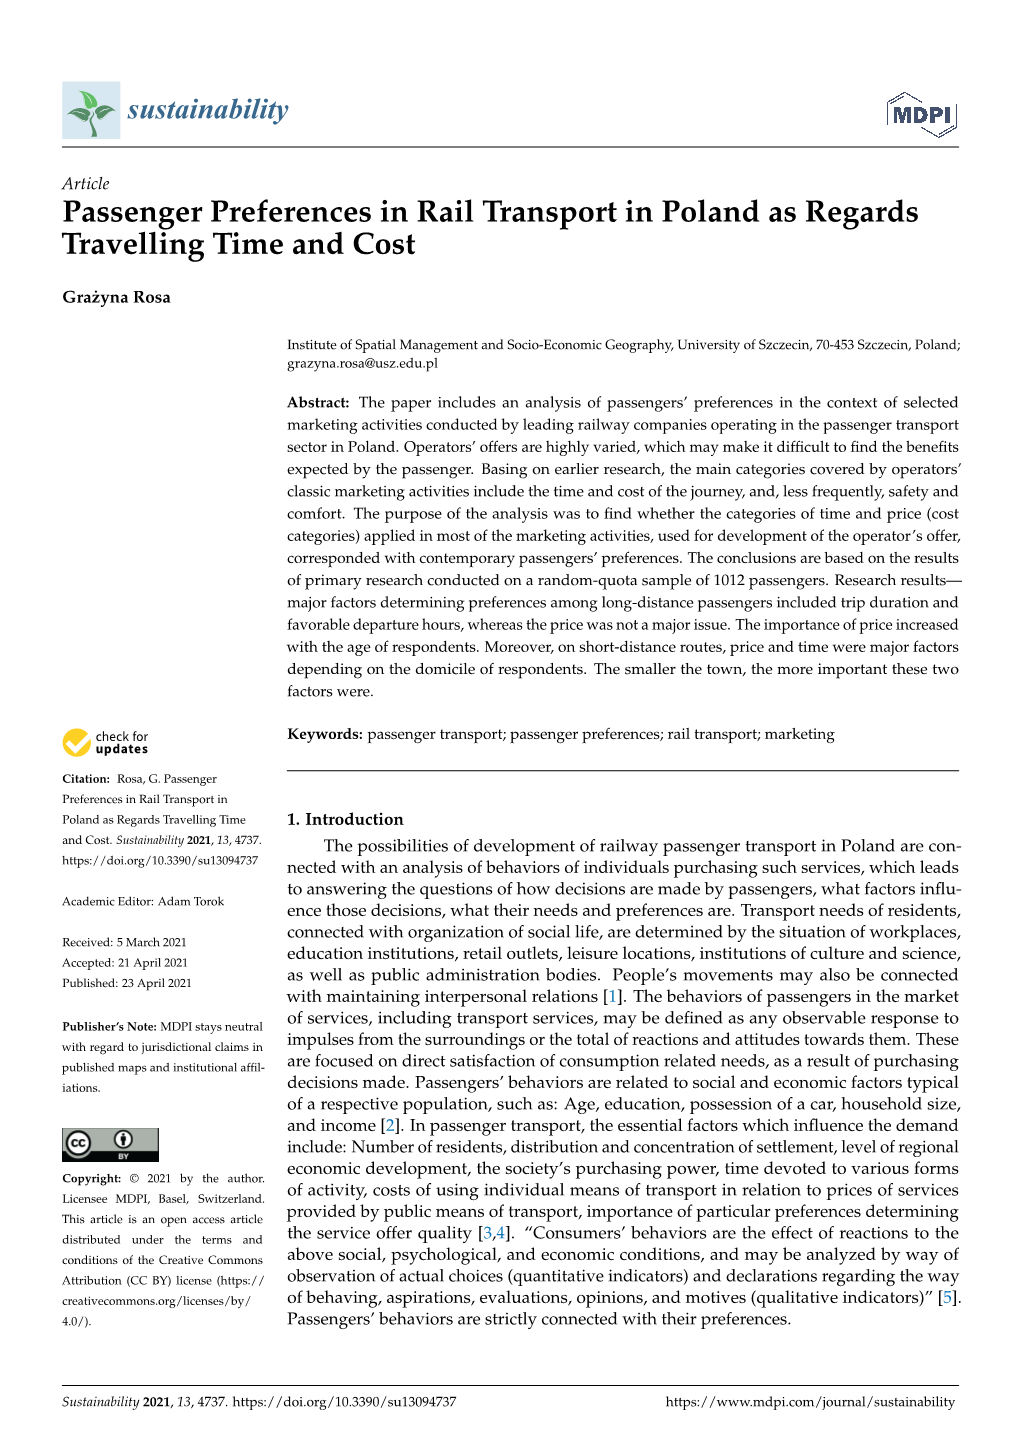 Passenger Preferences in Rail Transport in Poland As Regards Travelling Time and Cost